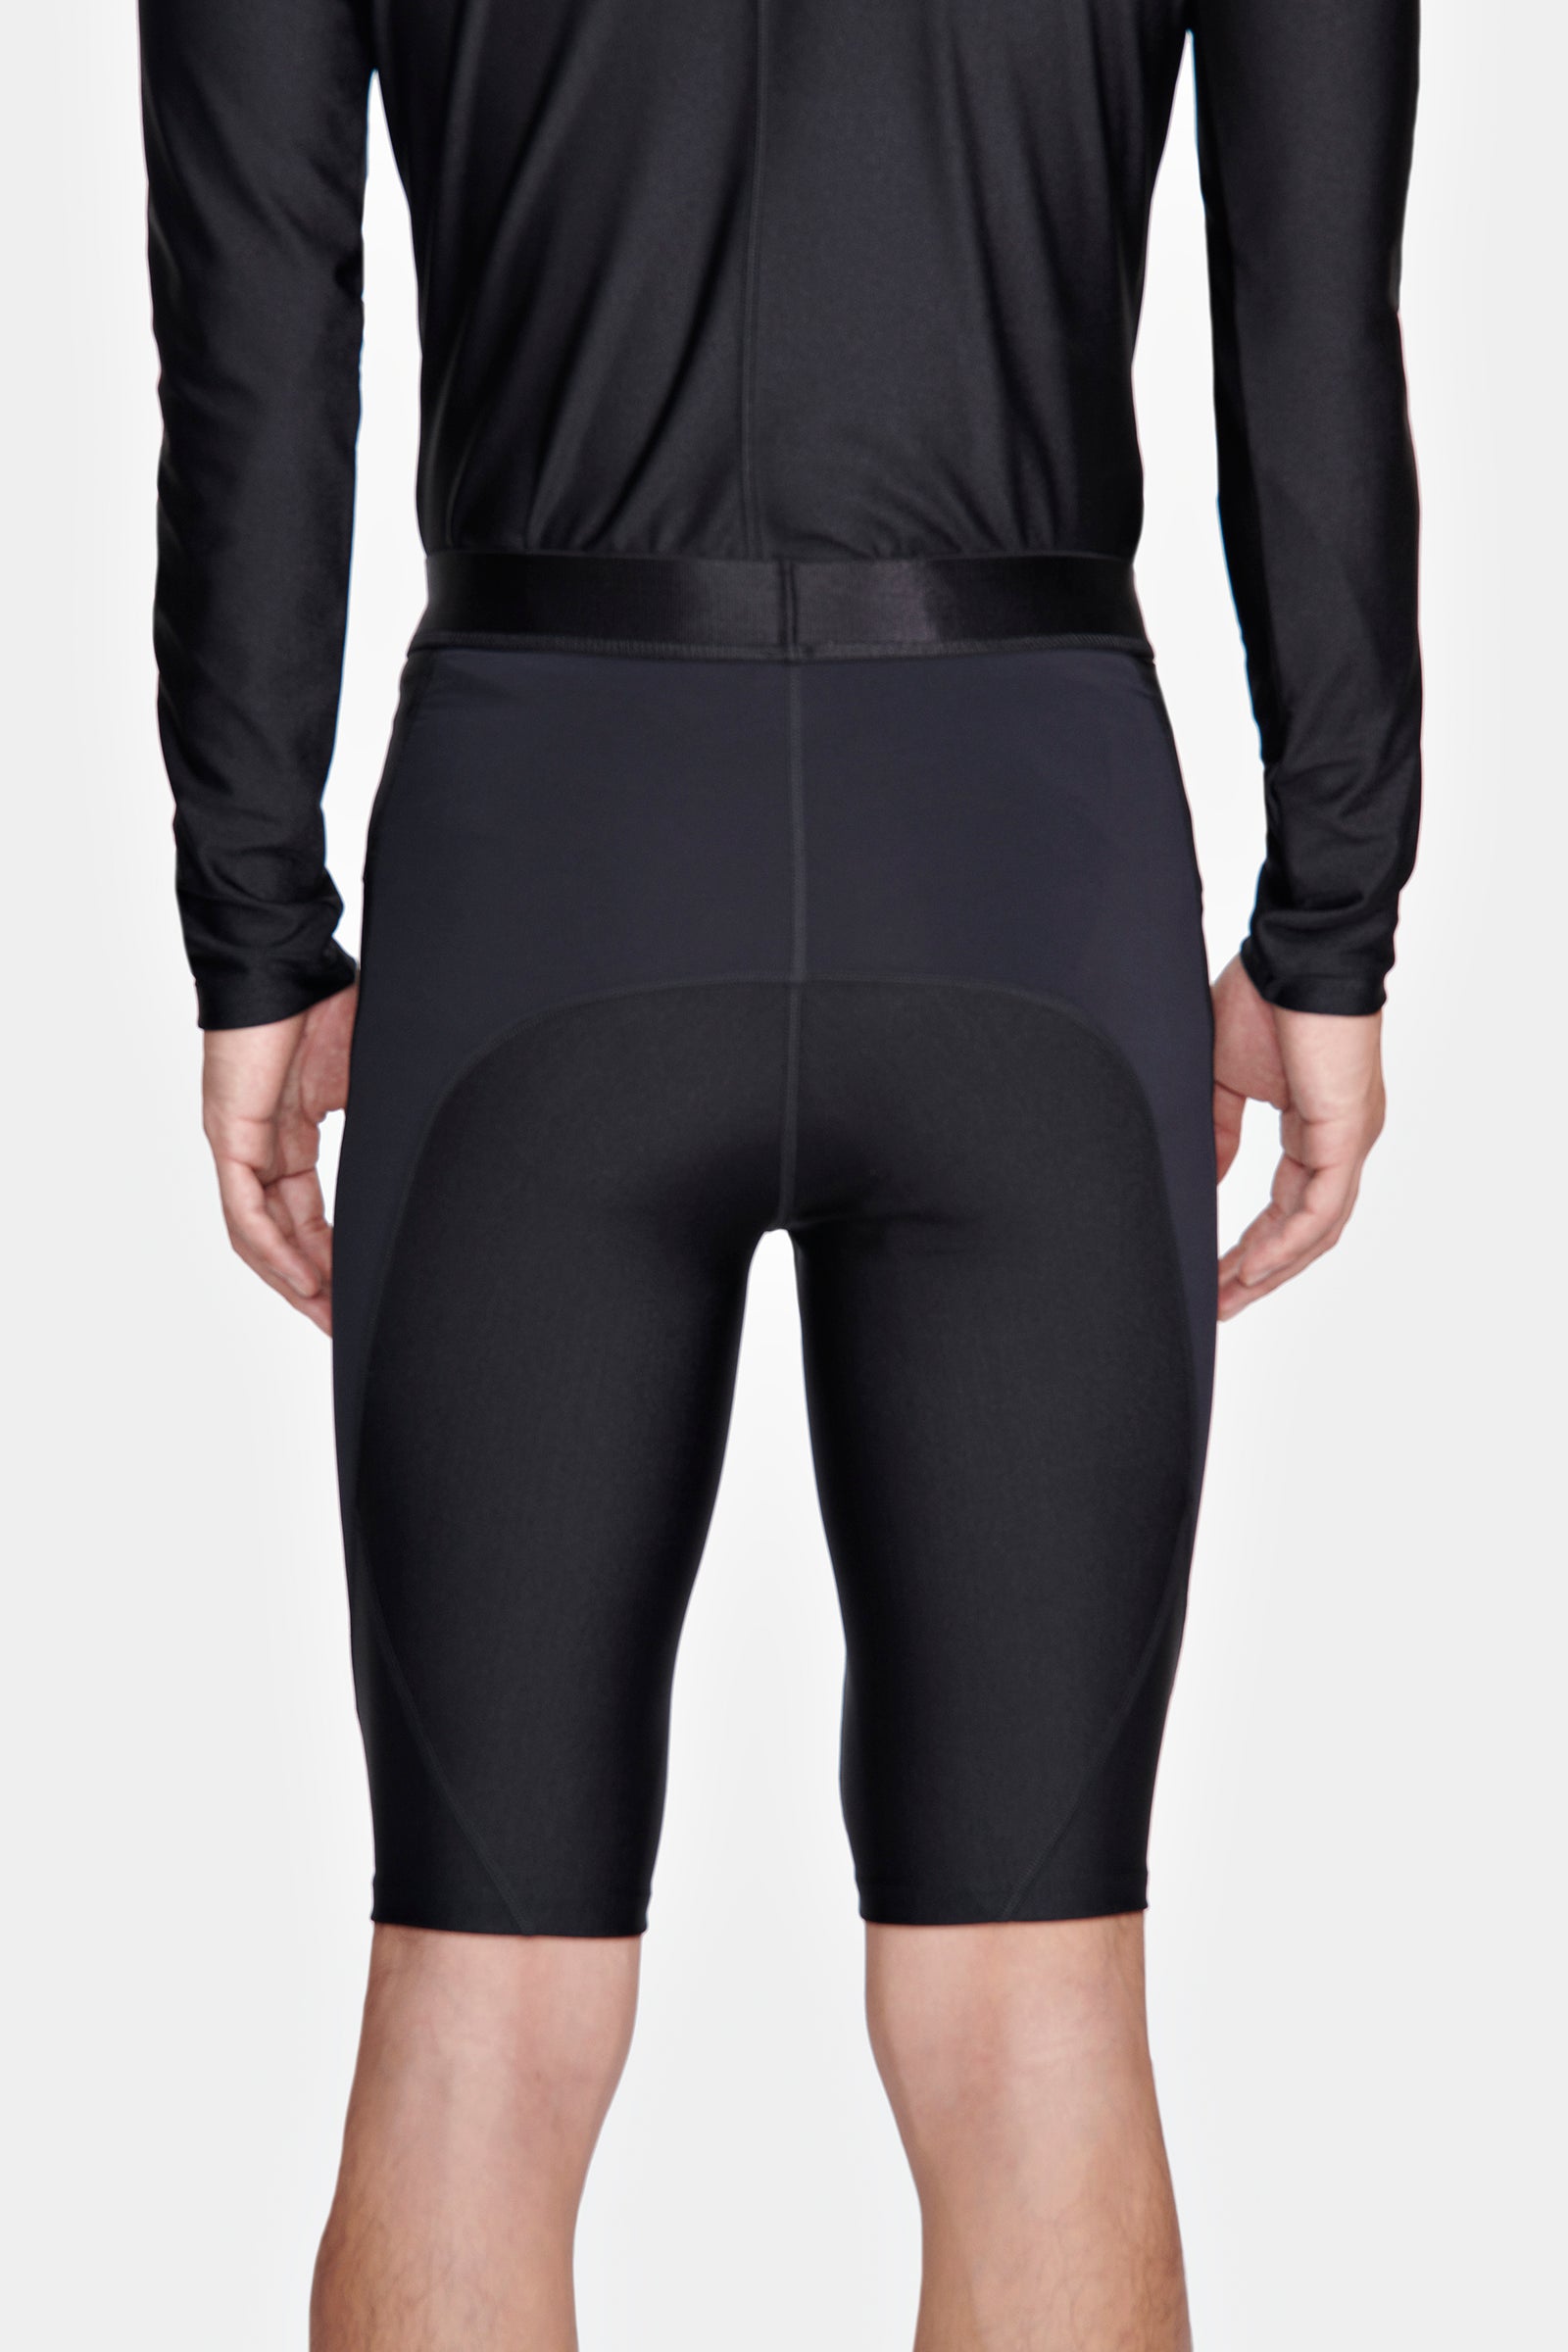 ACTIVEWEAR SHORTS IN RECYCLED JERSEY